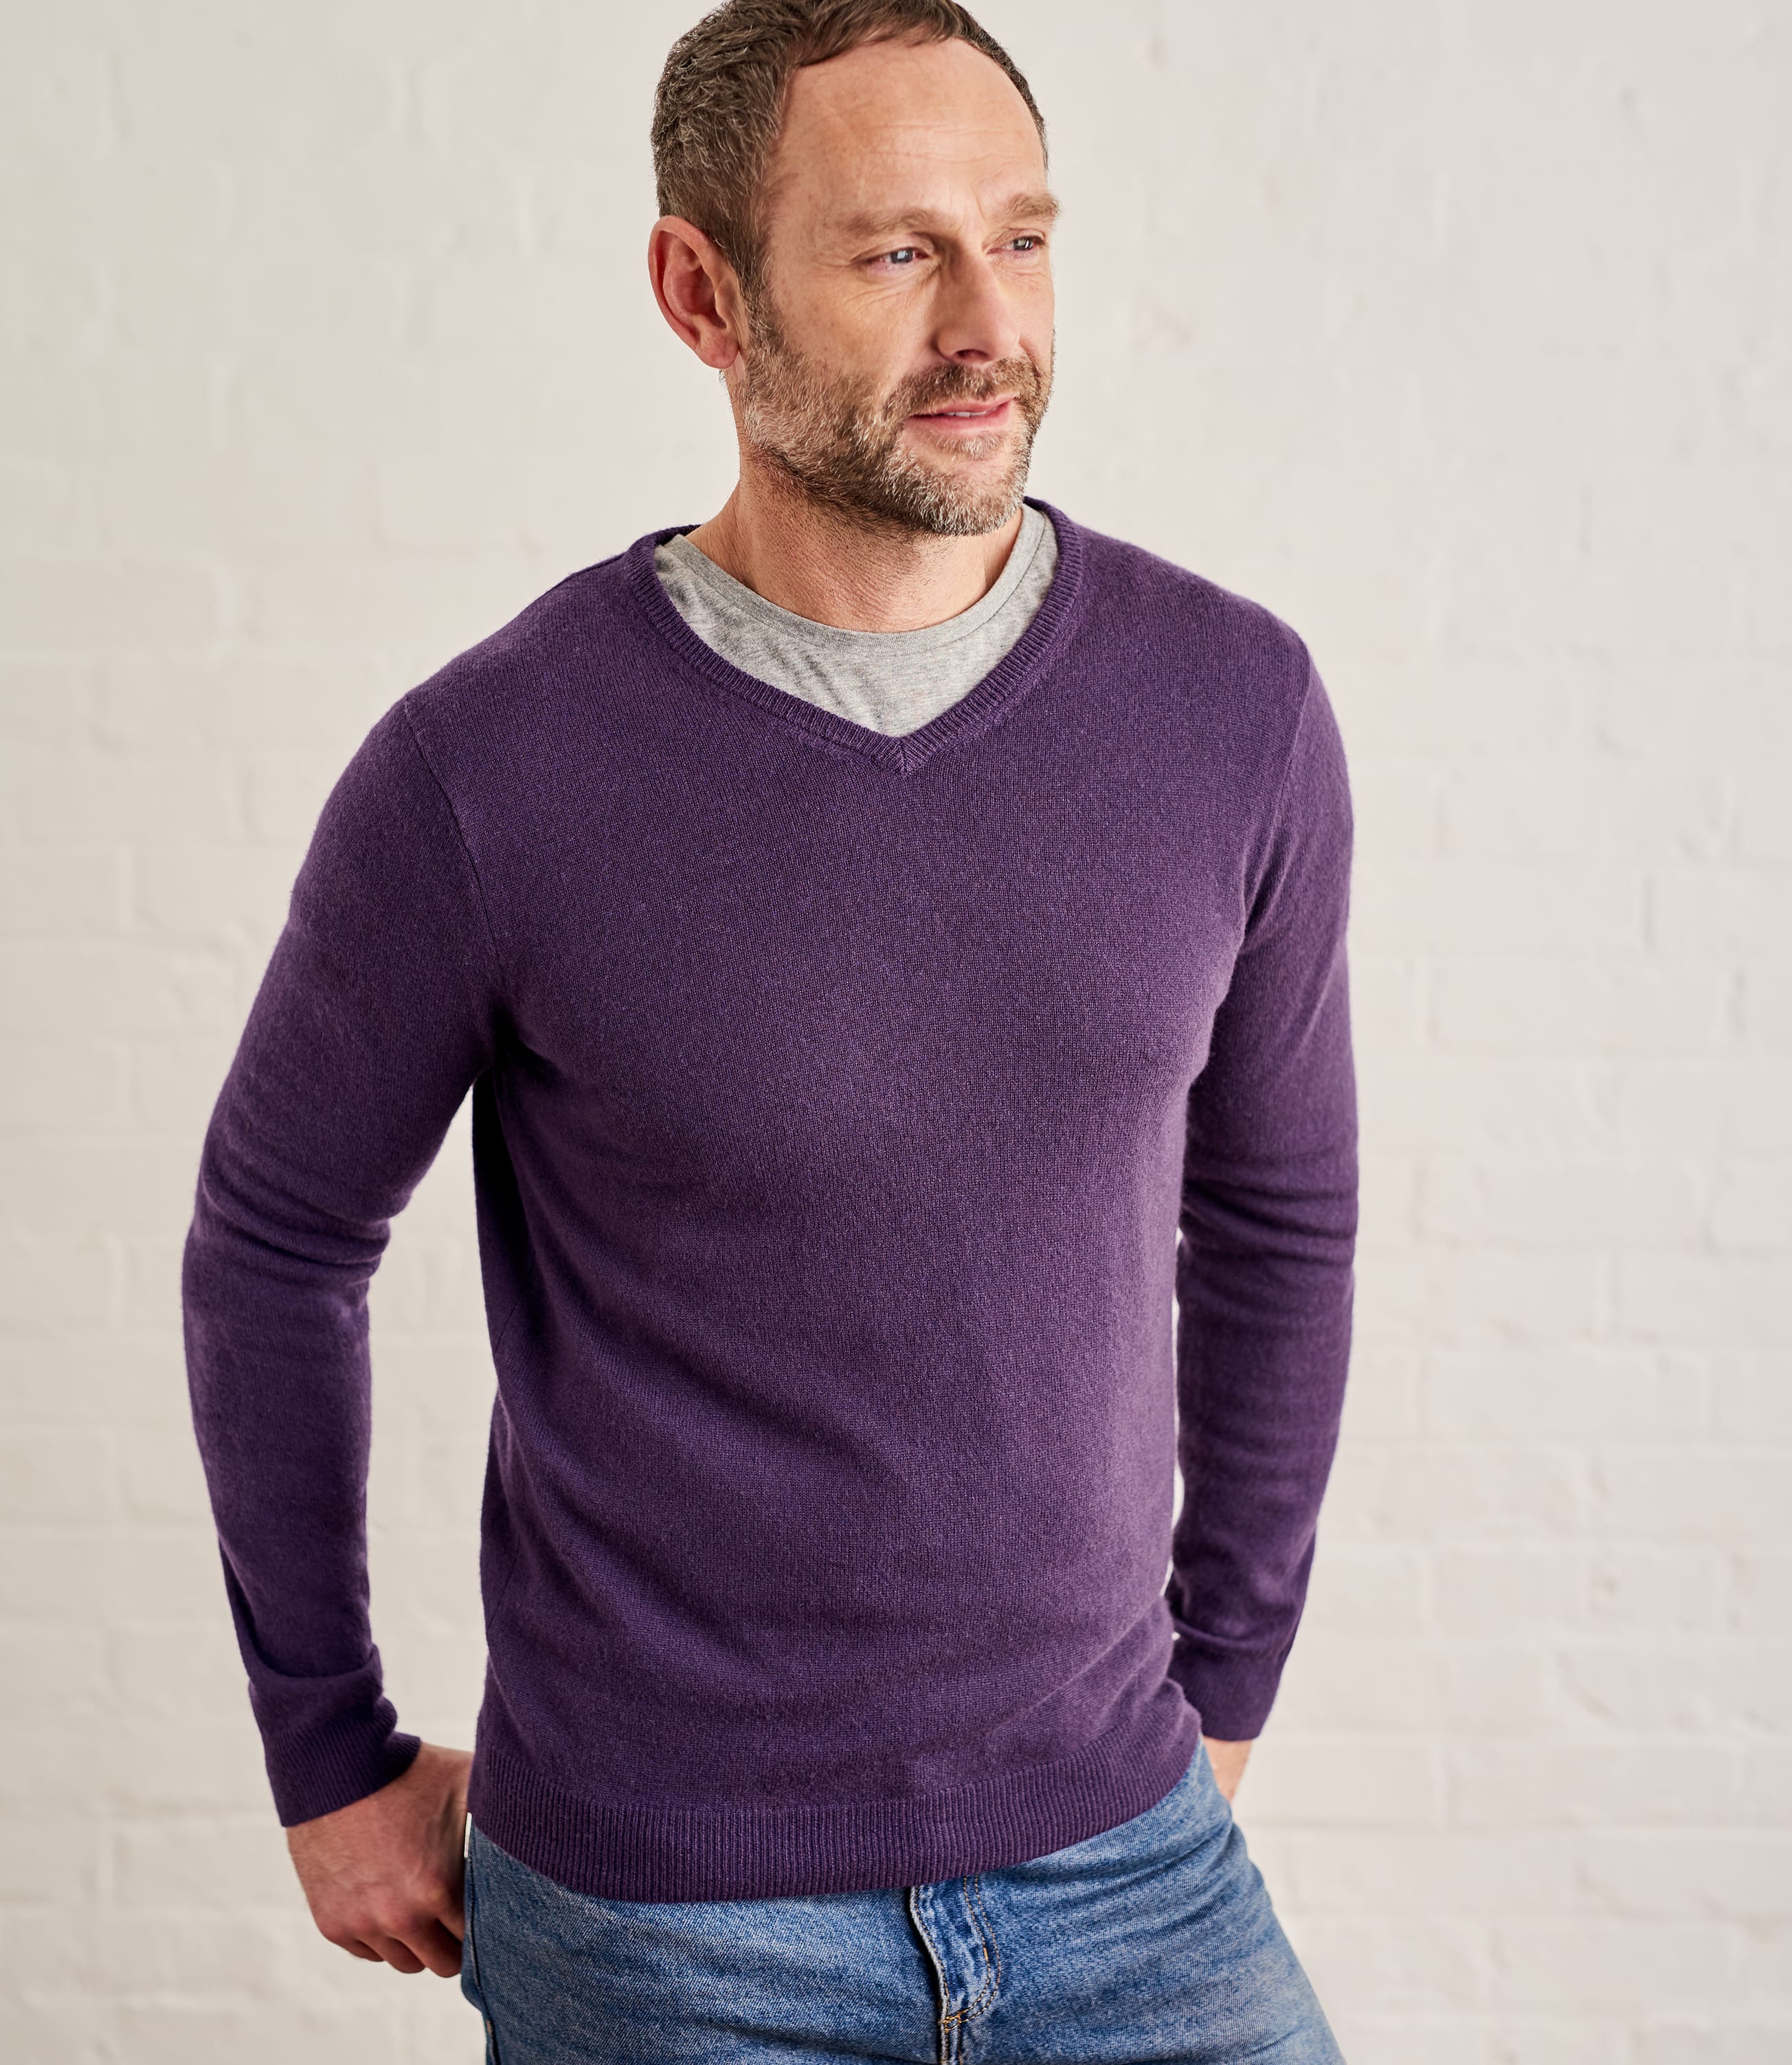 Blueberry | Cashmere & Merino Classic V Neck Knitted Sweater | WoolOvers UK